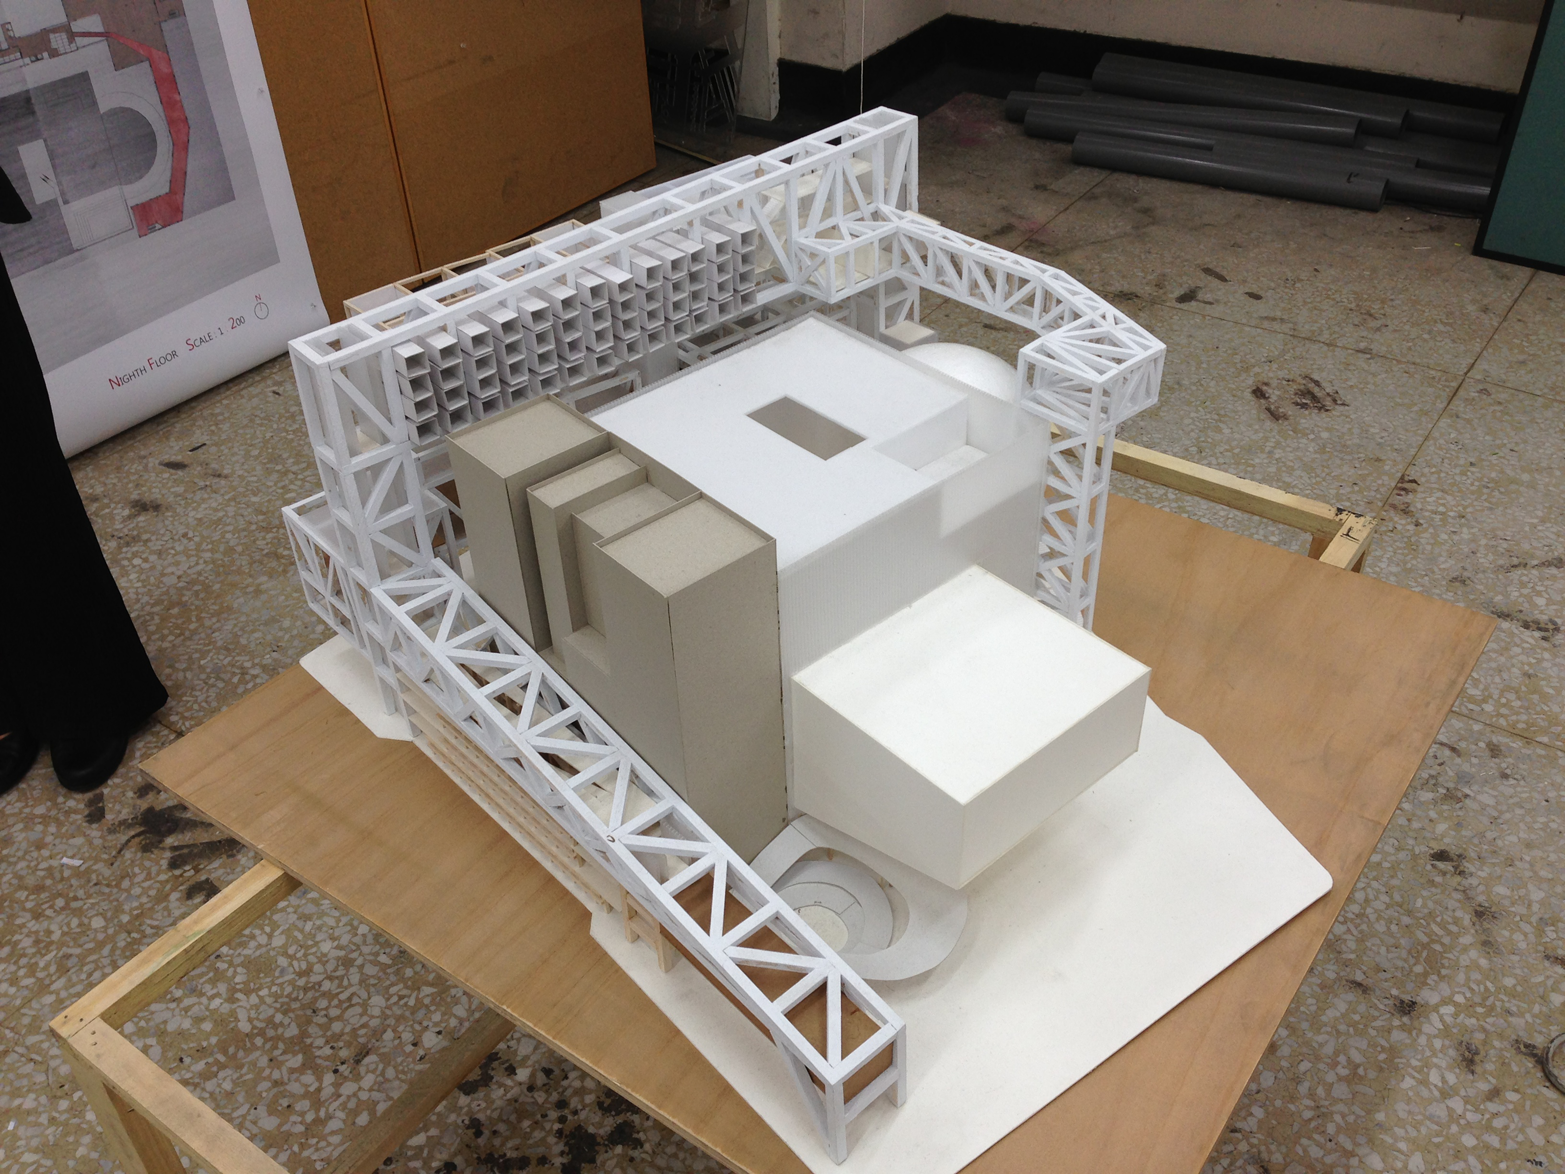 More complicated models allow architects to test air flow and daylight for their chosen form.